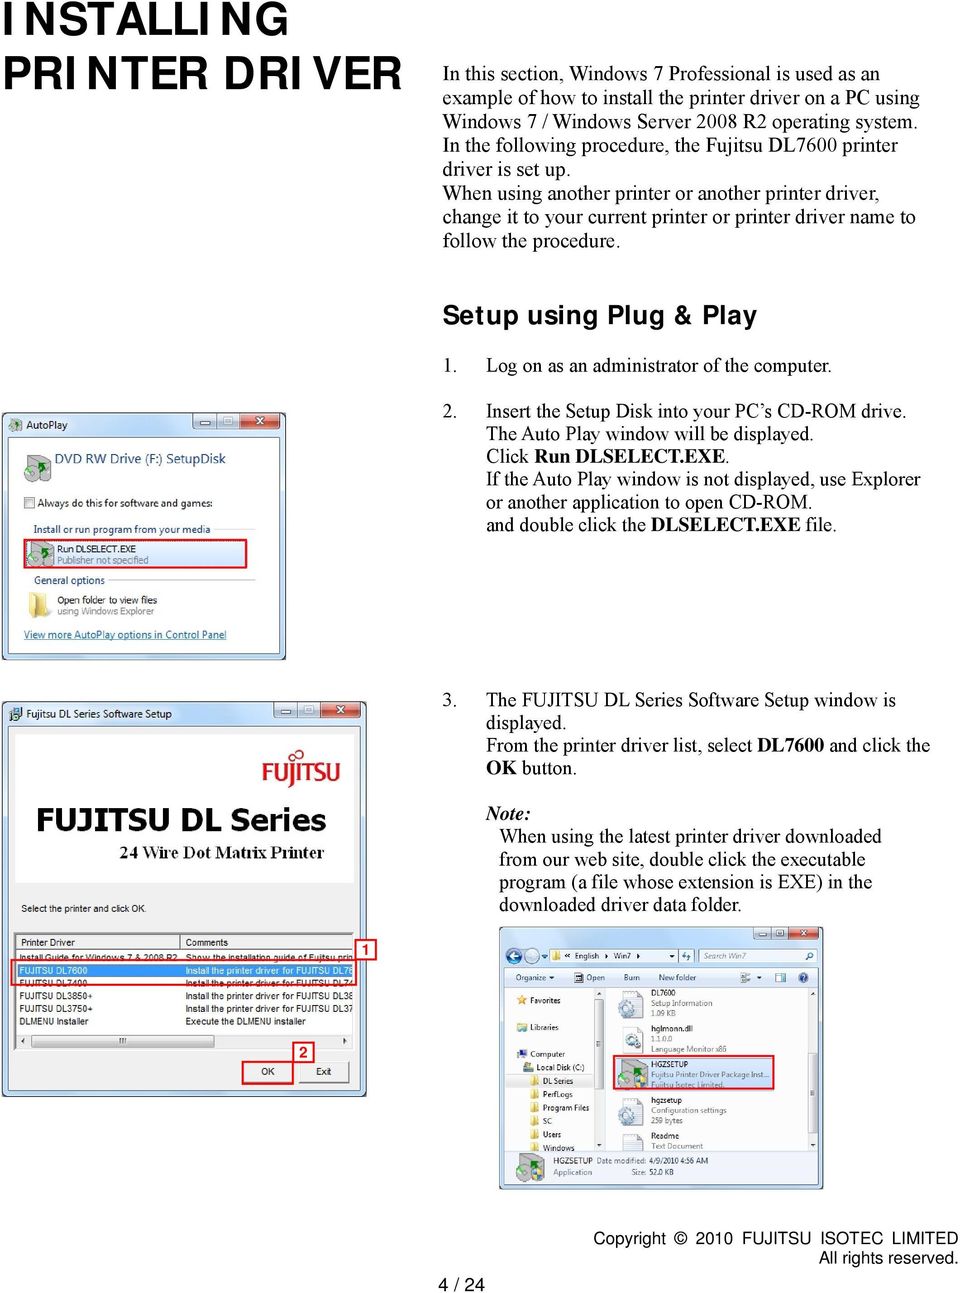 When using another printer or another printer driver, change it to your current printer or printer driver name to follow the procedure. Setup using Plug & Play 1.